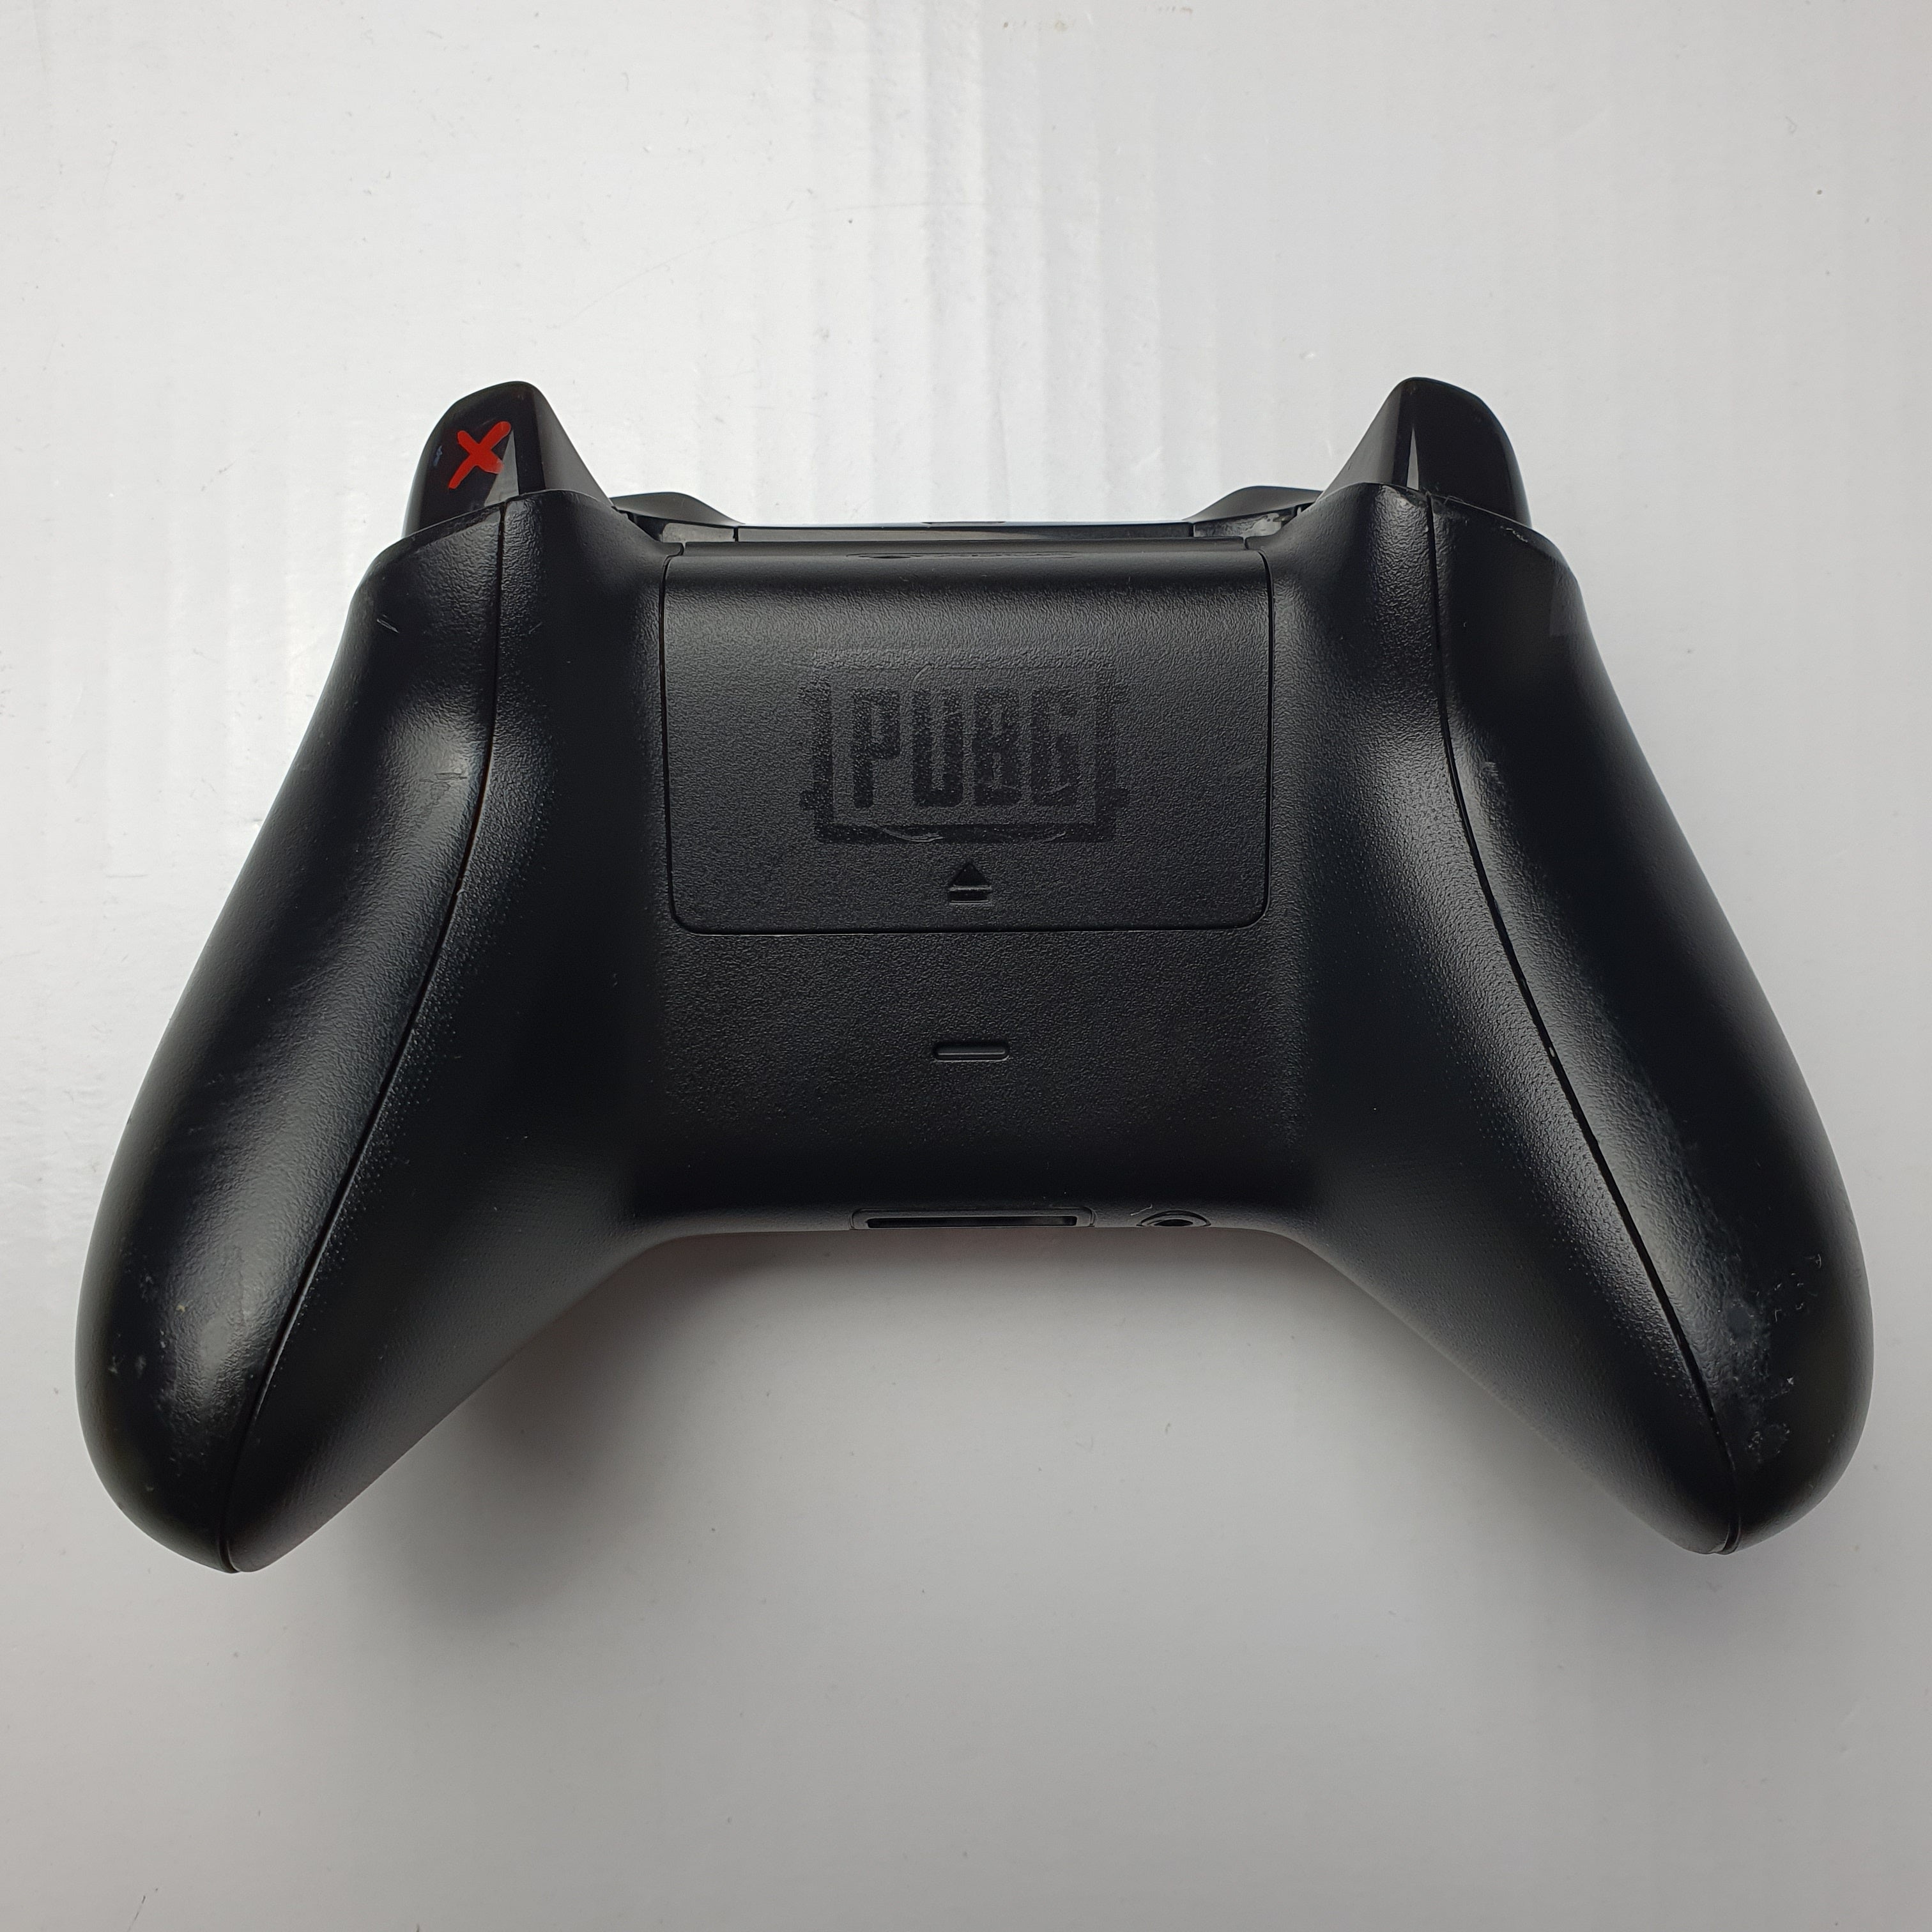 Official Microsoft Xbox Limited Edition 'PUBG' Wireless Bluetooth 